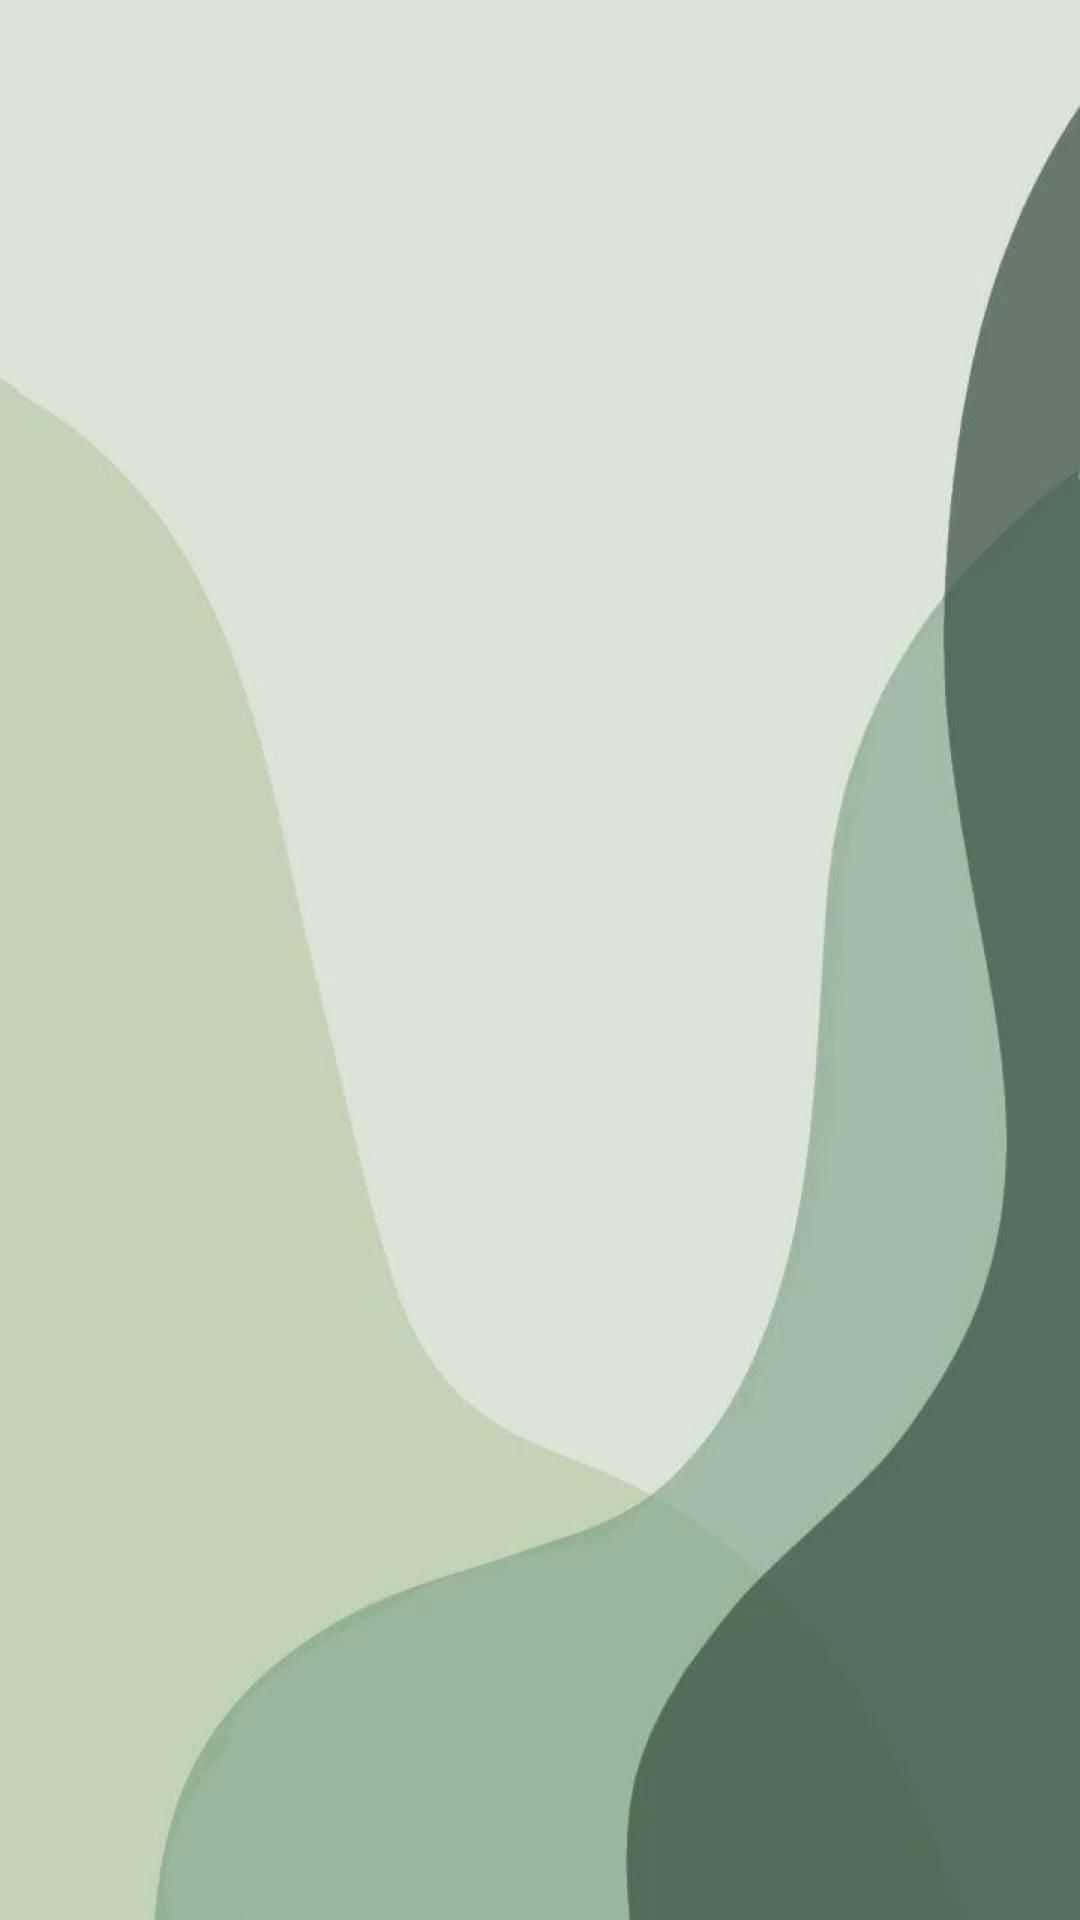 Cute Sage Green See Through Curving Slope Shapes Wallpaper